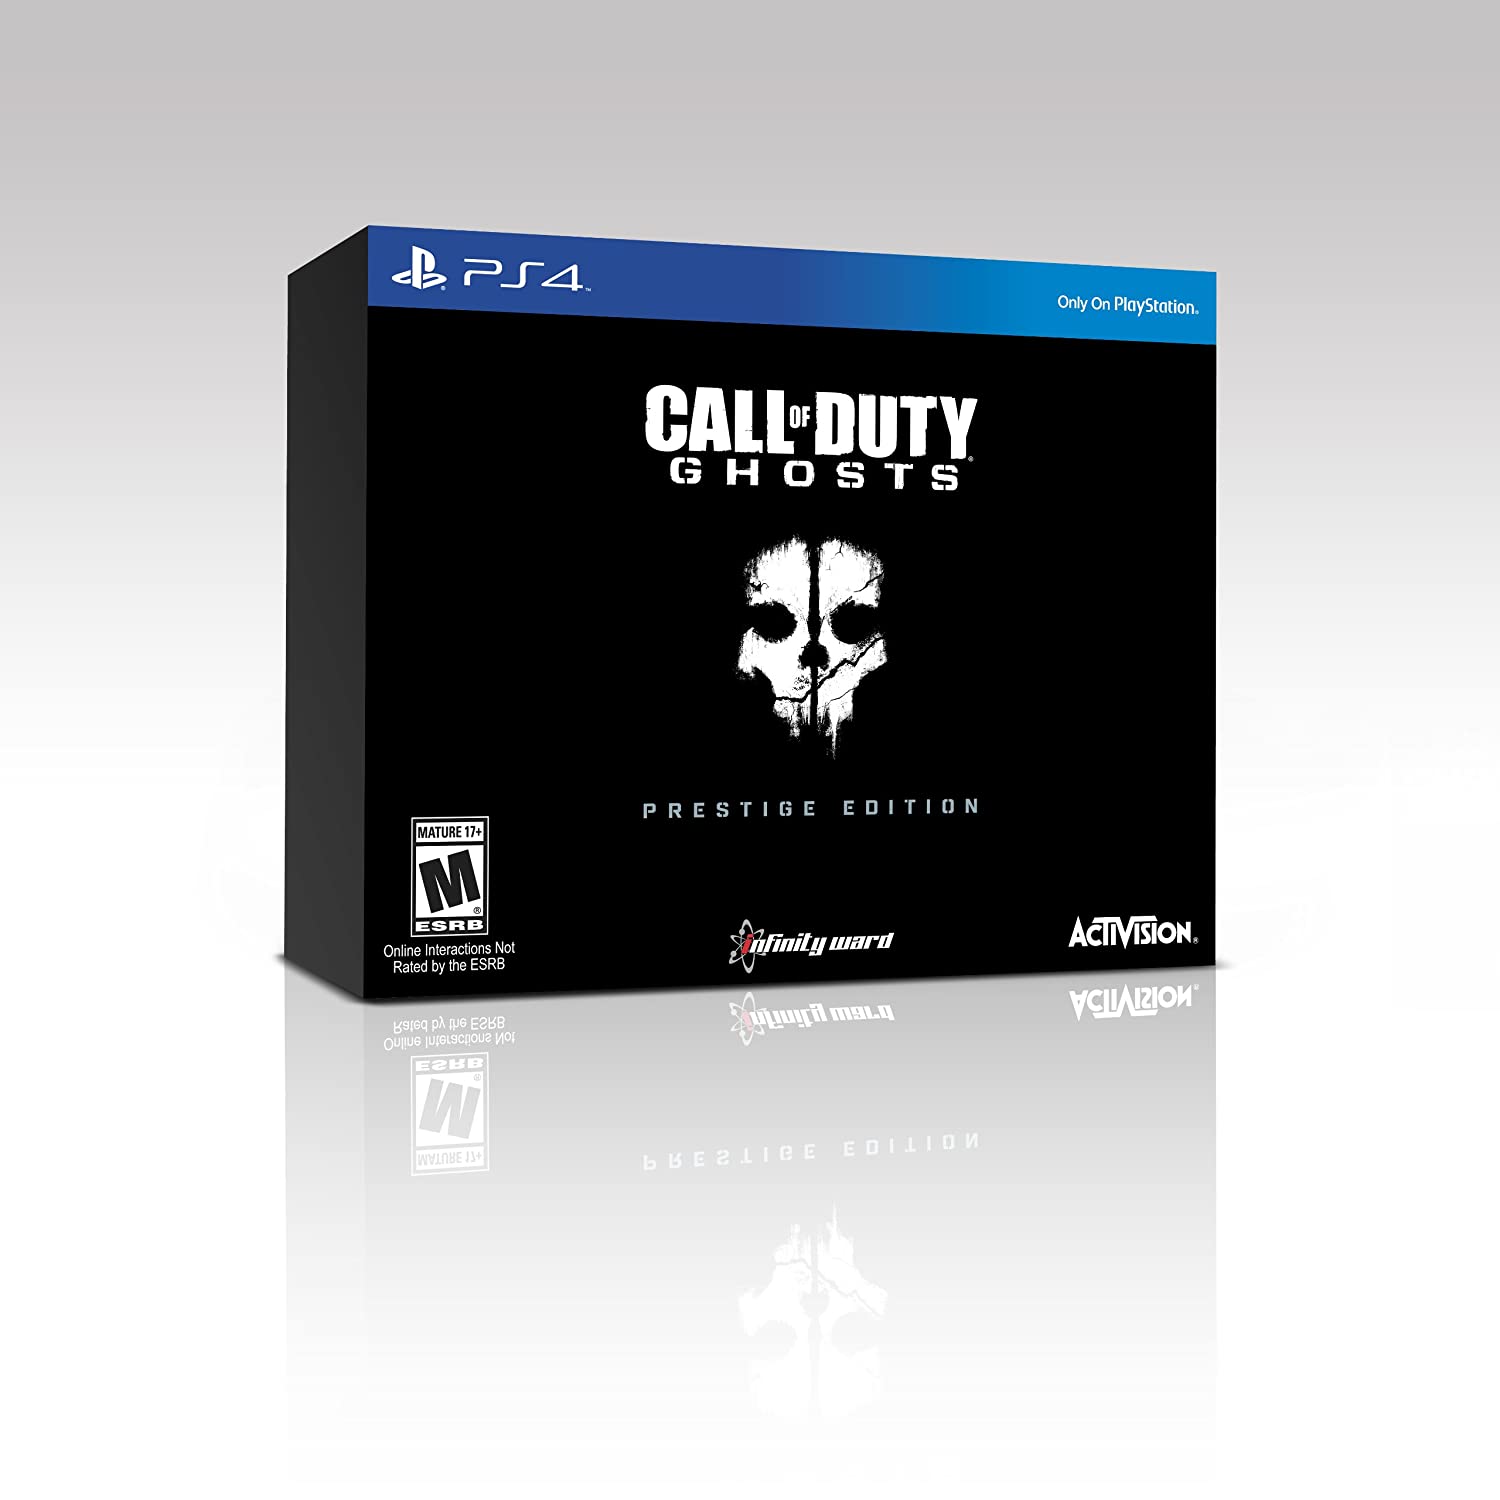  Call of Duty: Ghosts - PlayStation 4 : Activision Inc